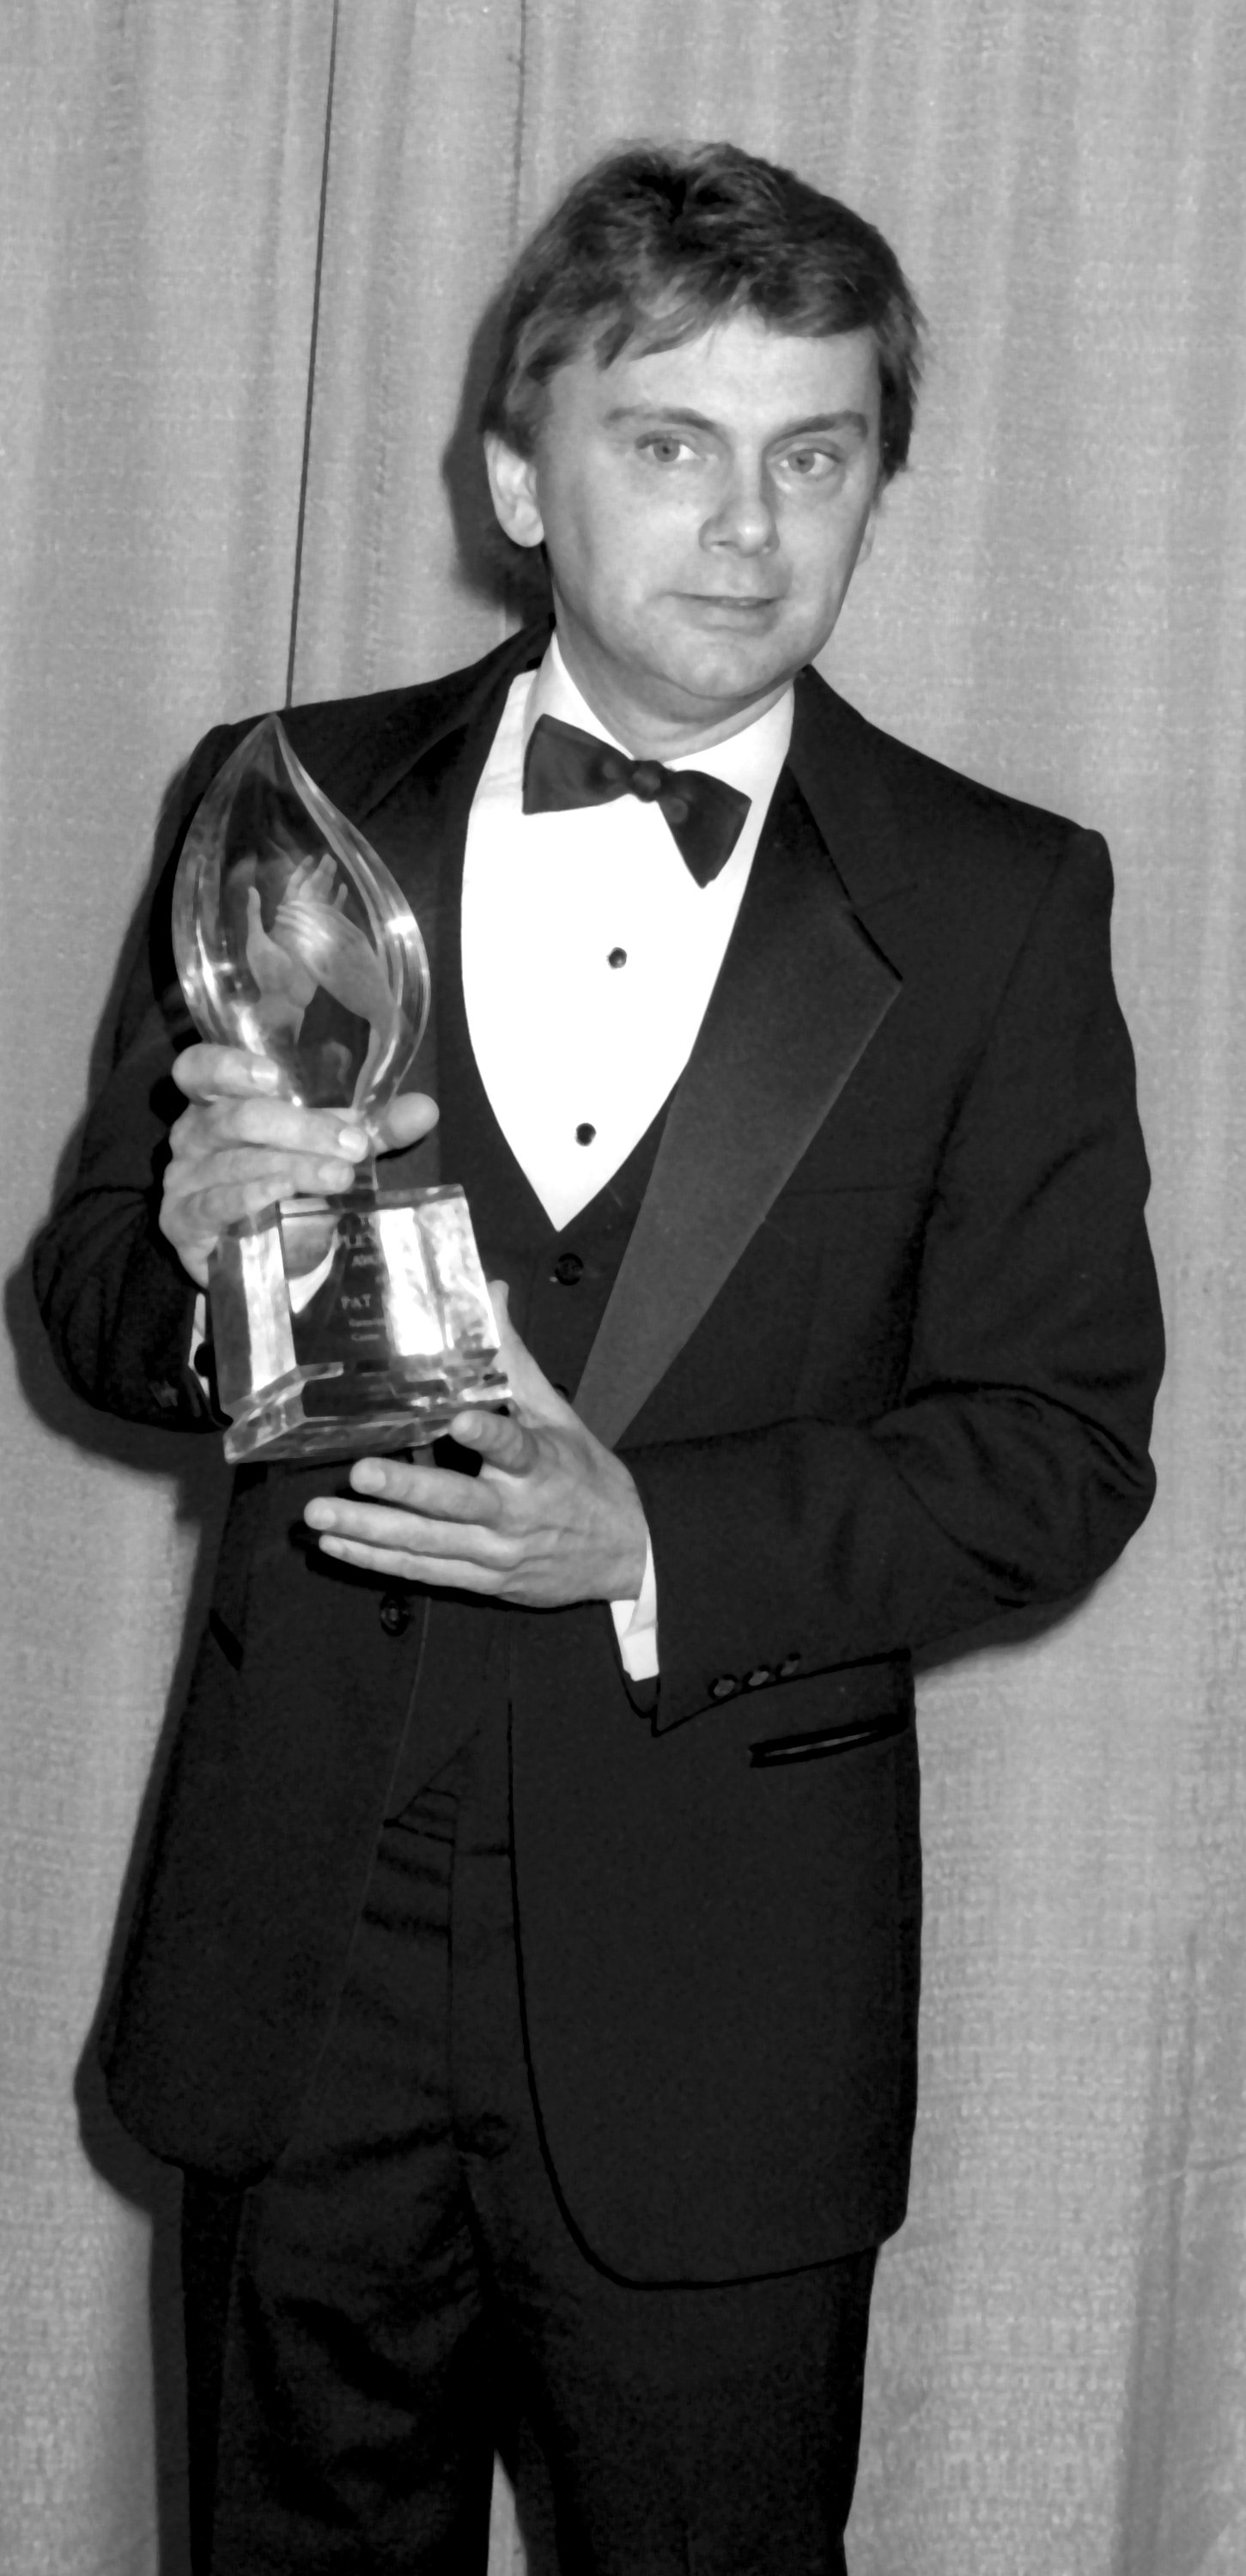 Pat Sajak at the 13th Annual People's Choice Awards on March 15, 1987, in Santa Monica, California. | Source: Getty Images